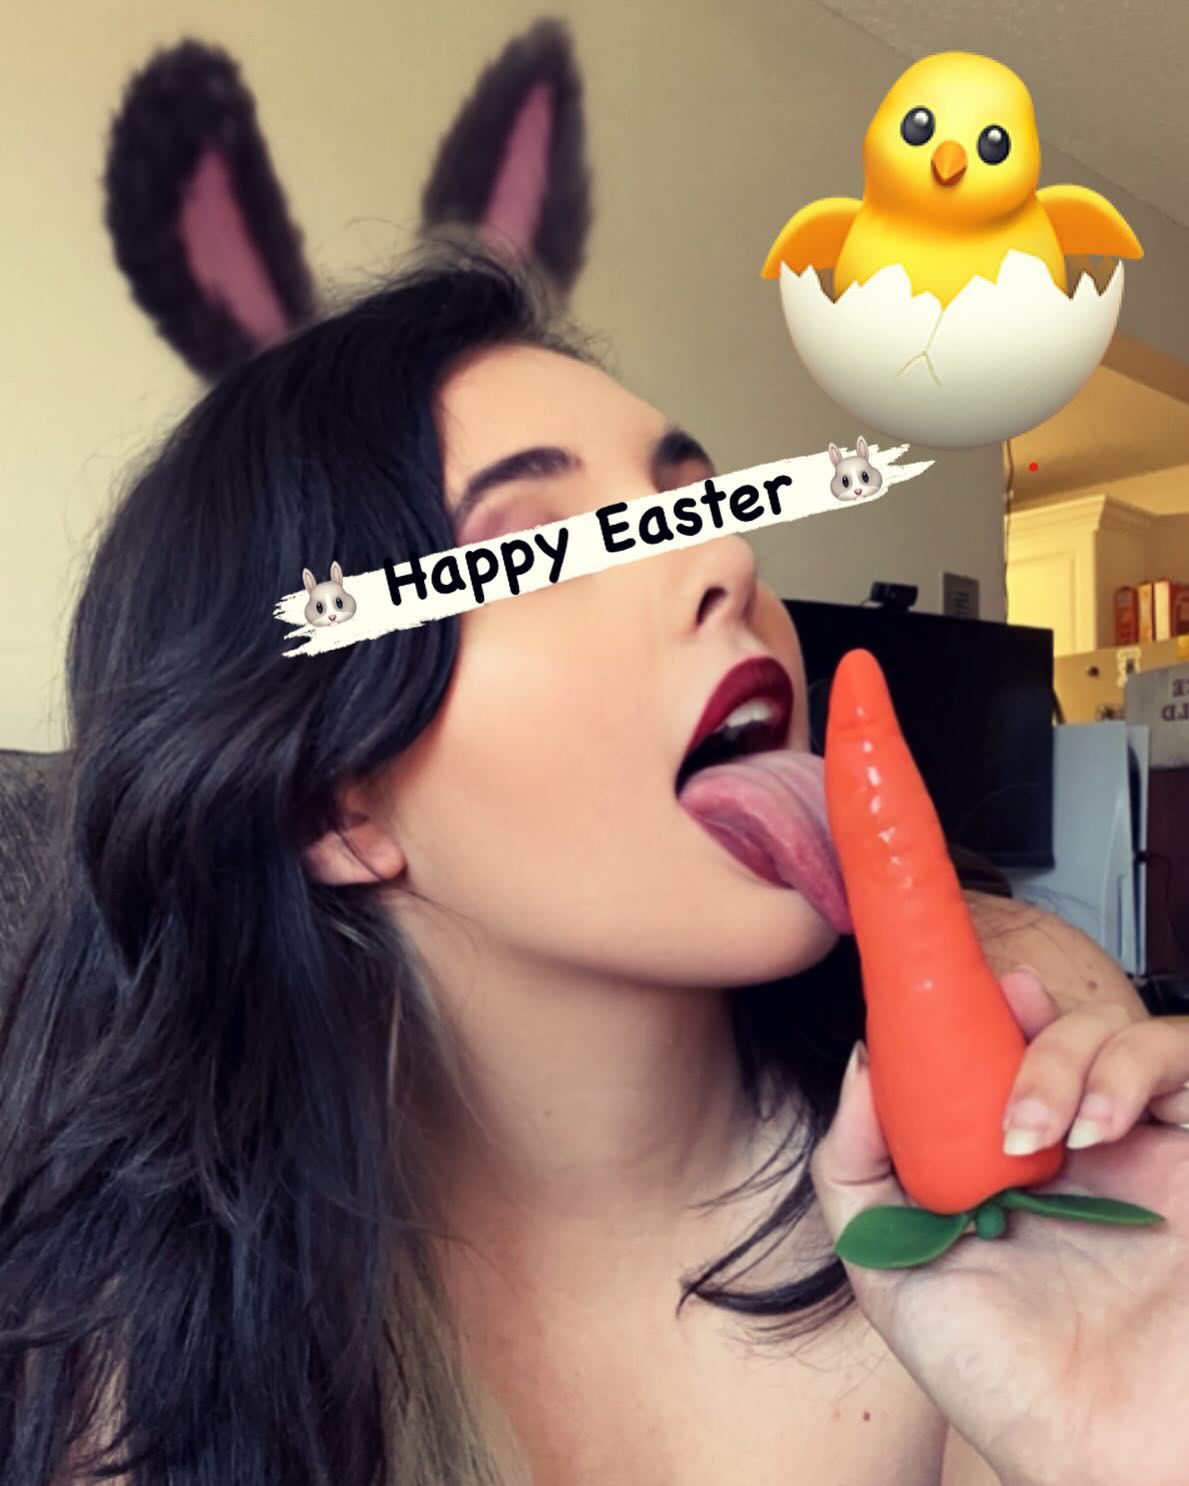 This little bunny is hungry for some carrot 🤤🥕 Got any?? 🥺 

#easter #happyeaster #carrot #bunny #rabbit #model #photoshoot #cute #girl #pretty